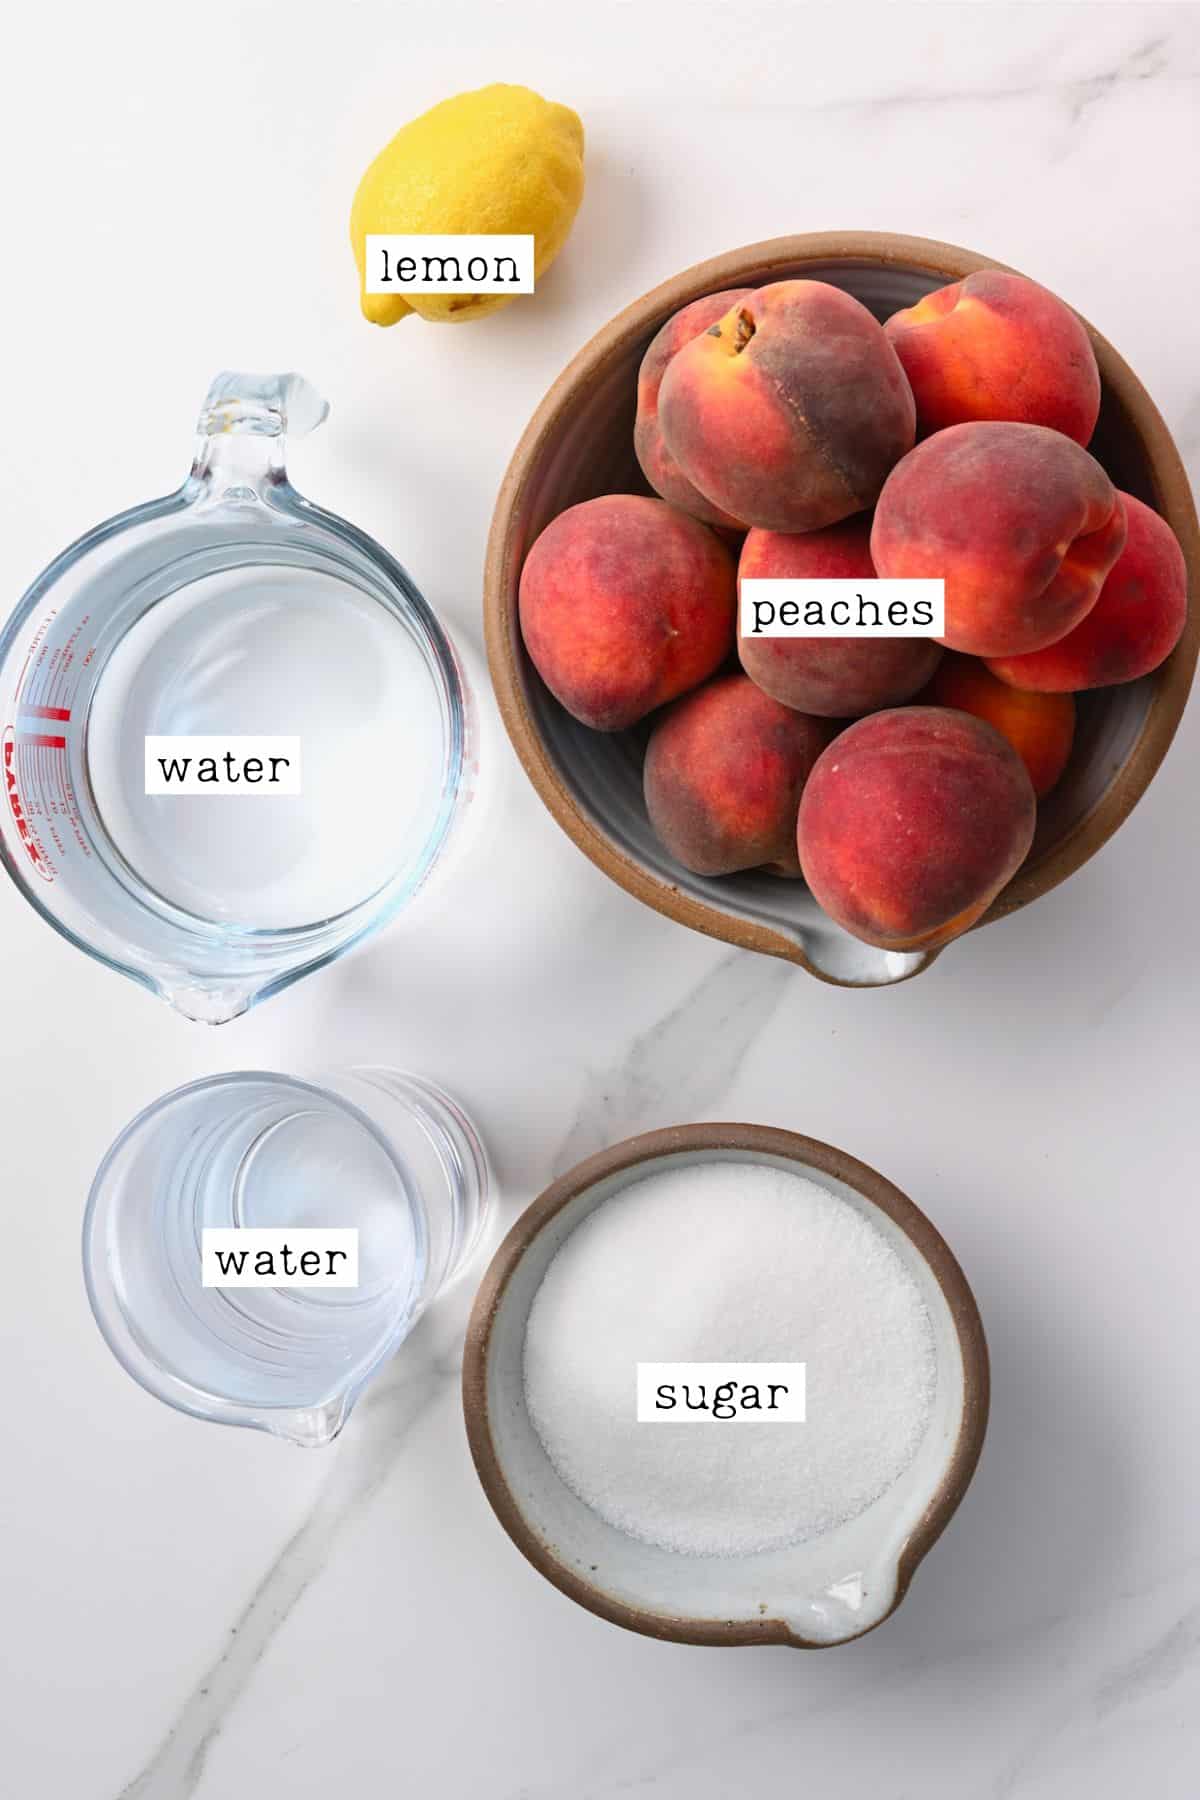 Ingredients for canned peaches